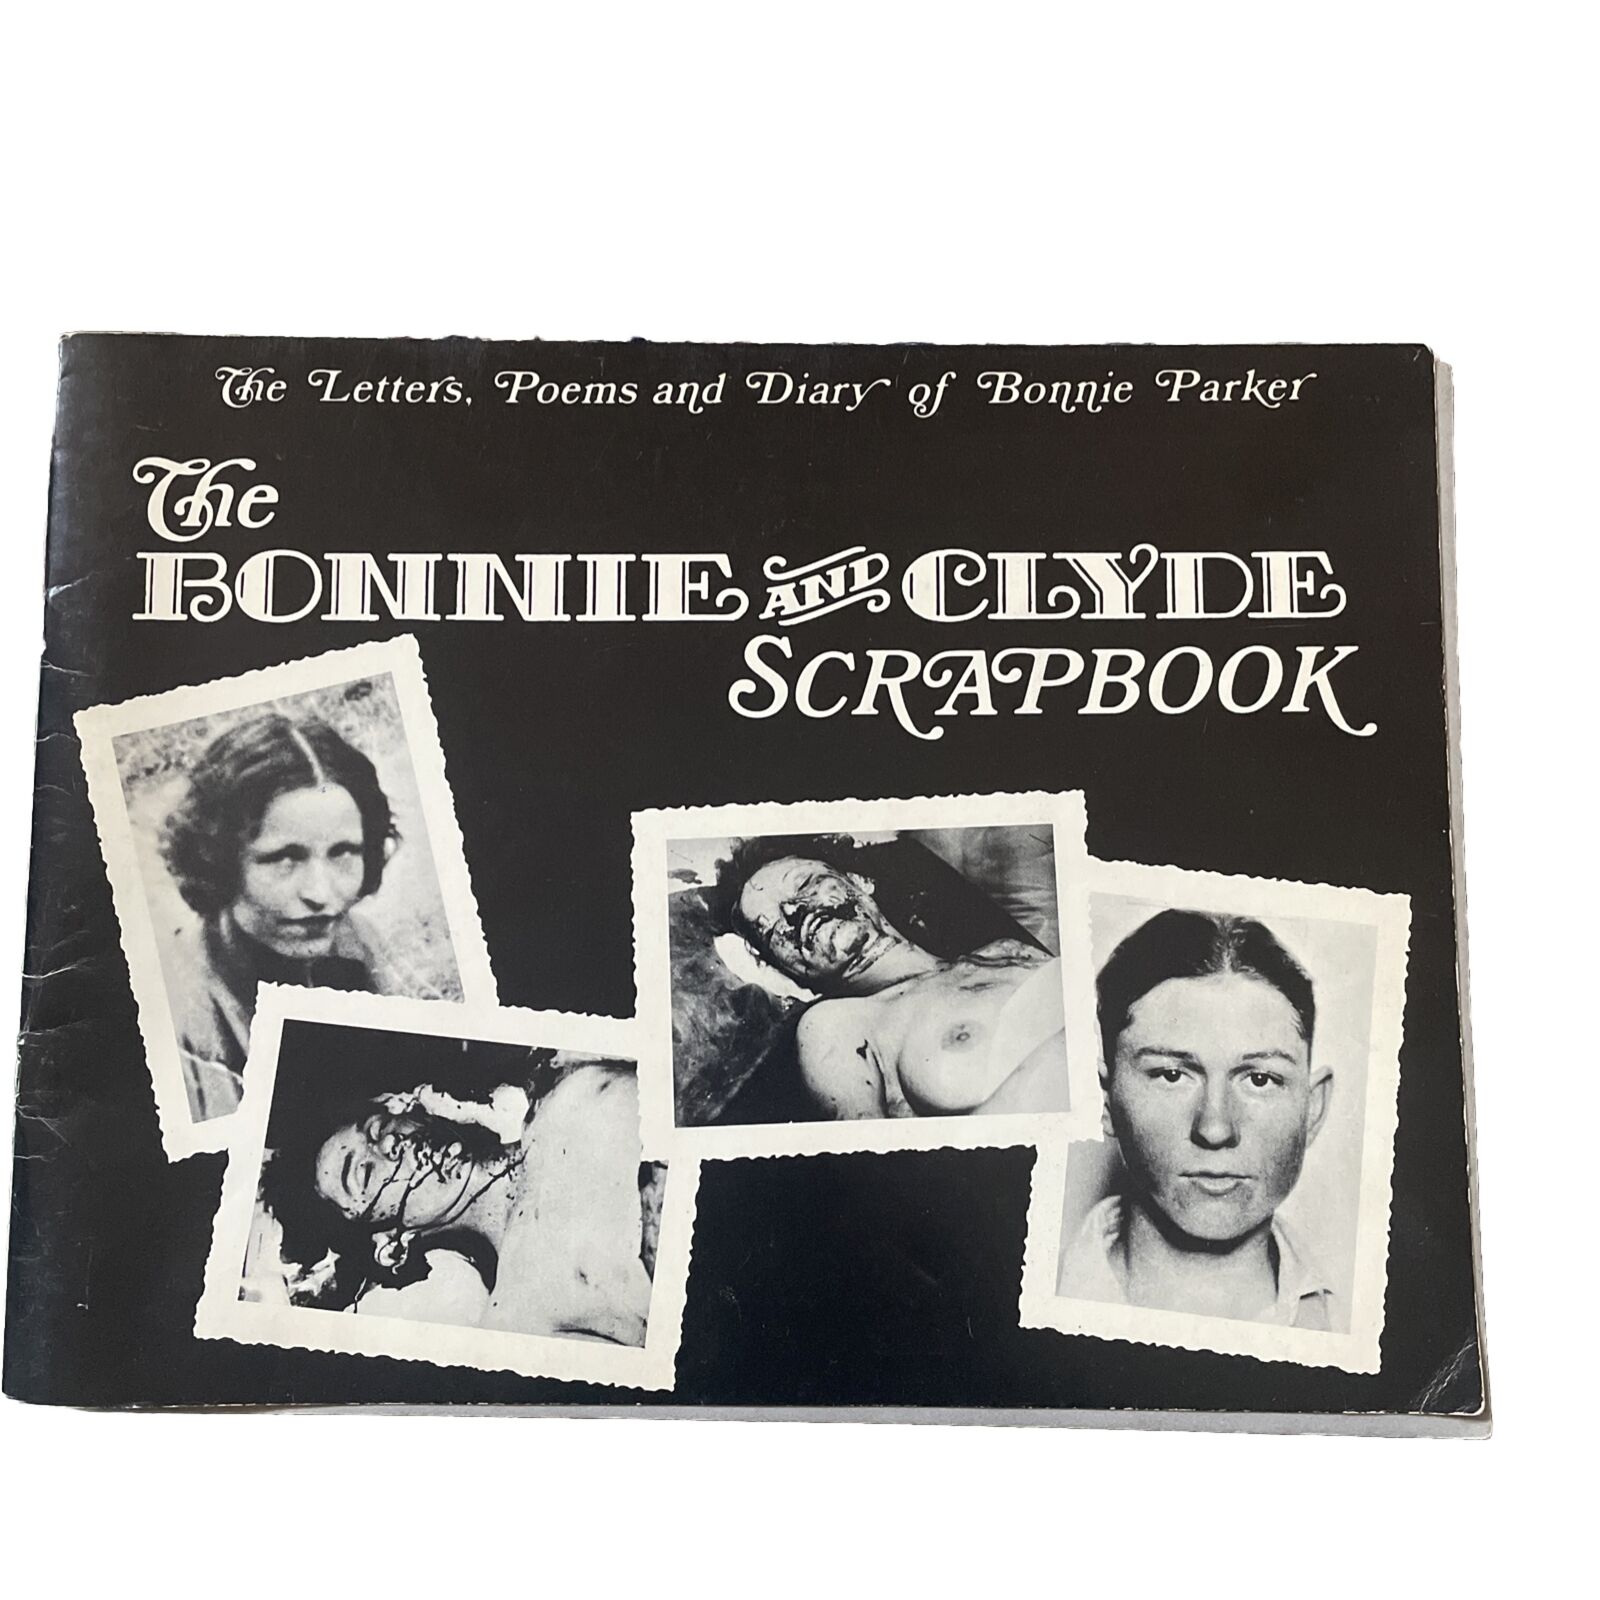 RARE Original The Bonnie And Clyde Scrapbook~ Great Piece Of History